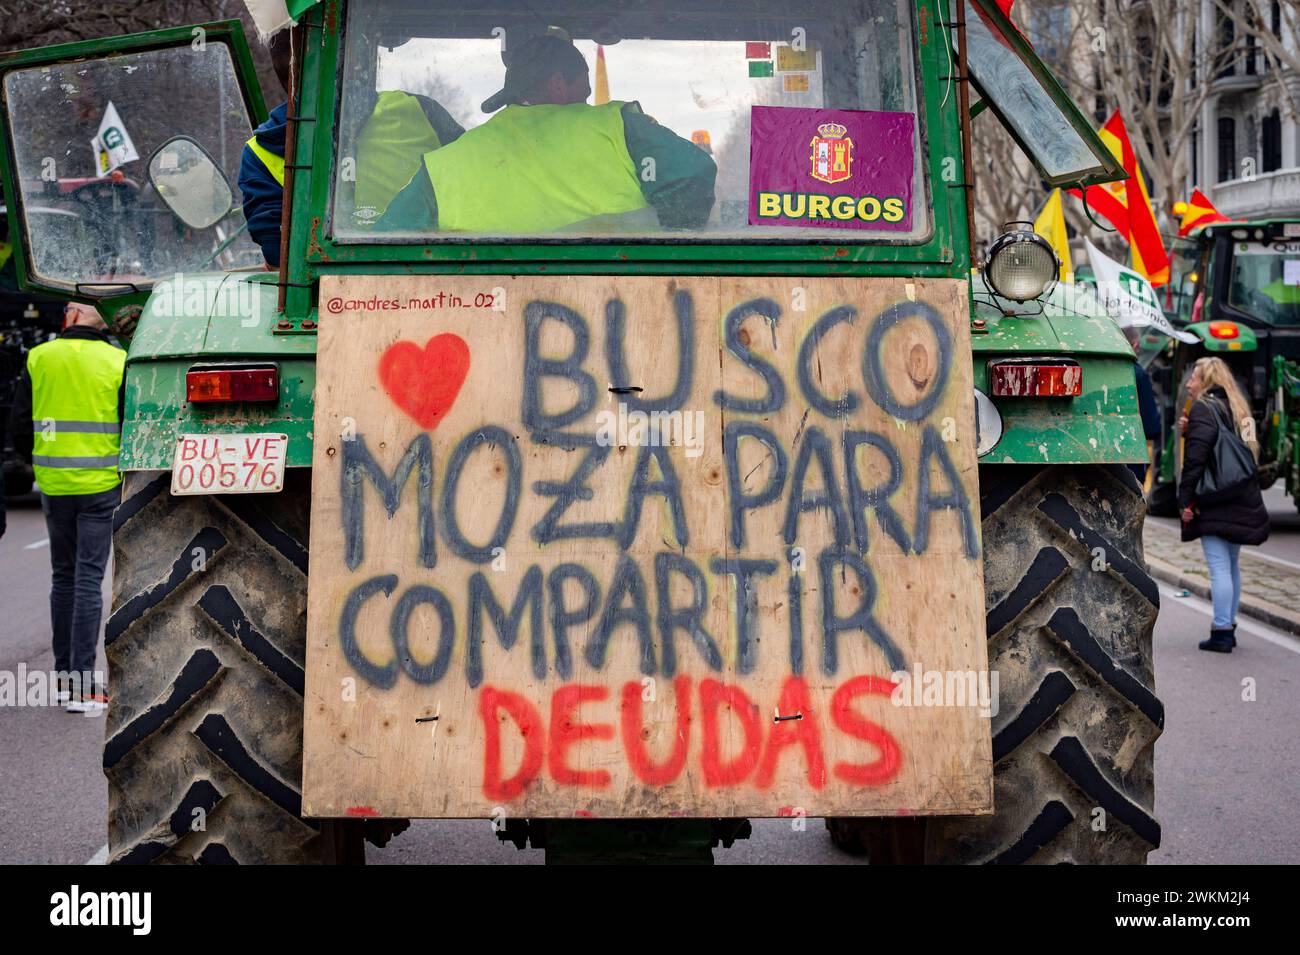 Spanish farmer demonstration in Madrid A protest sign is displayed on a tractor during the farmers demonstration in Madrid the protest, organized by Spanish trade unions, is focused on concerns over unfair competition from products originating outside the EU. Farmers are also unhappy about the meager profits derived from their crops and are critical of EU agricultural policy. Madrid Puerta de Alcala Madrid Spain Copyright: xAlbertoxGardinx AGardin 20240221 manifestacion tractores madrid 184 Stock Photo